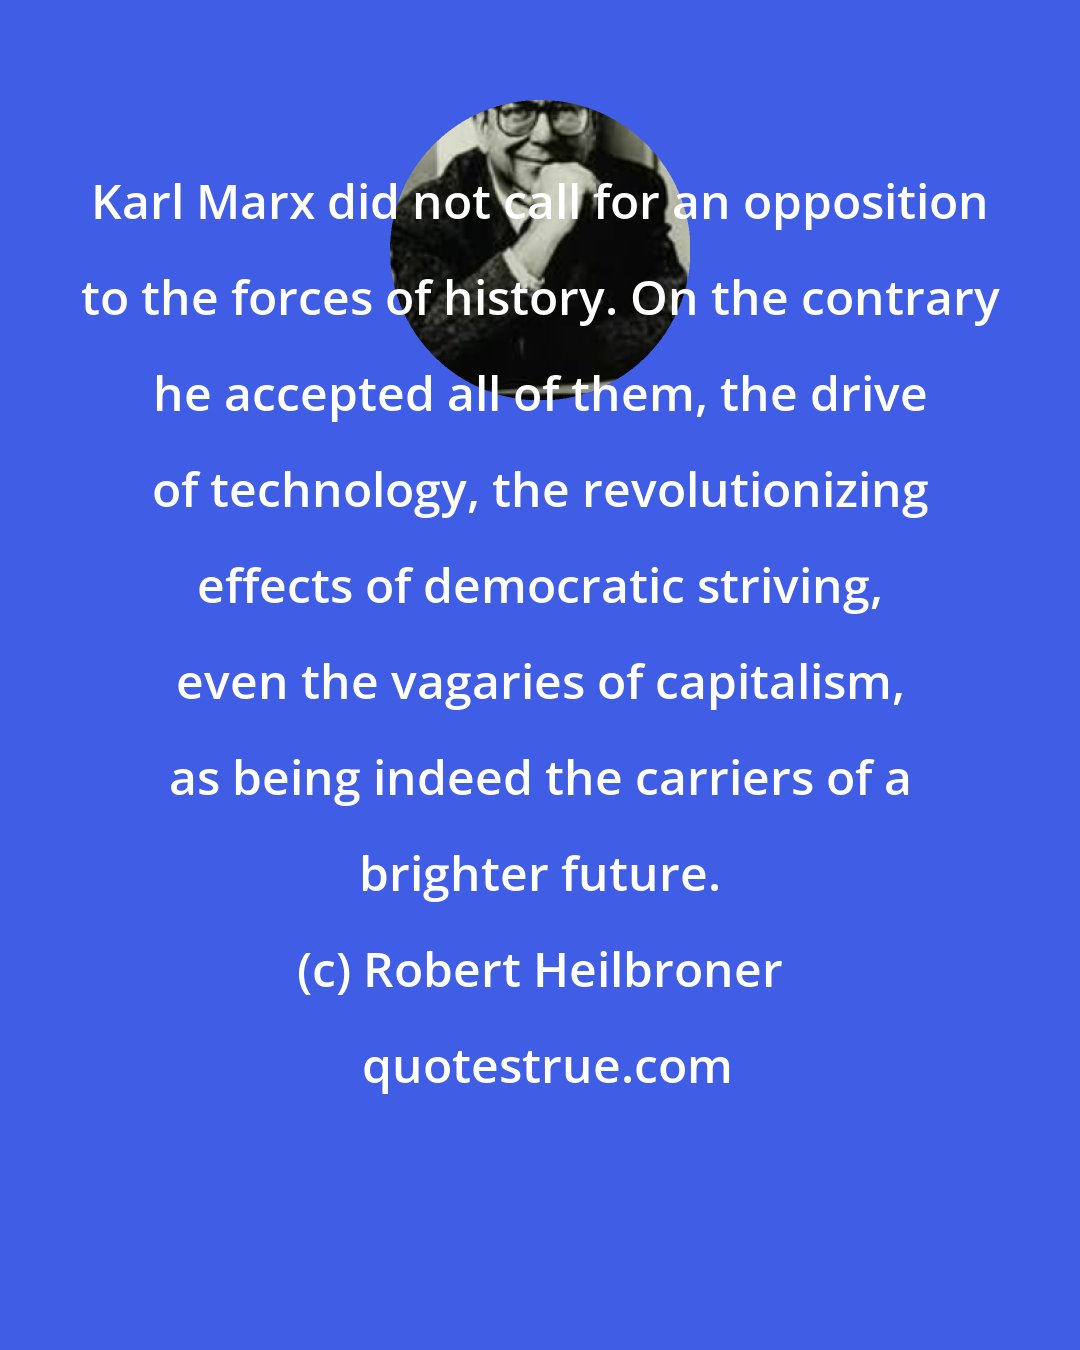 Robert Heilbroner: Karl Marx did not call for an opposition to the forces of history. On the contrary he accepted all of them, the drive of technology, the revolutionizing effects of democratic striving, even the vagaries of capitalism, as being indeed the carriers of a brighter future.